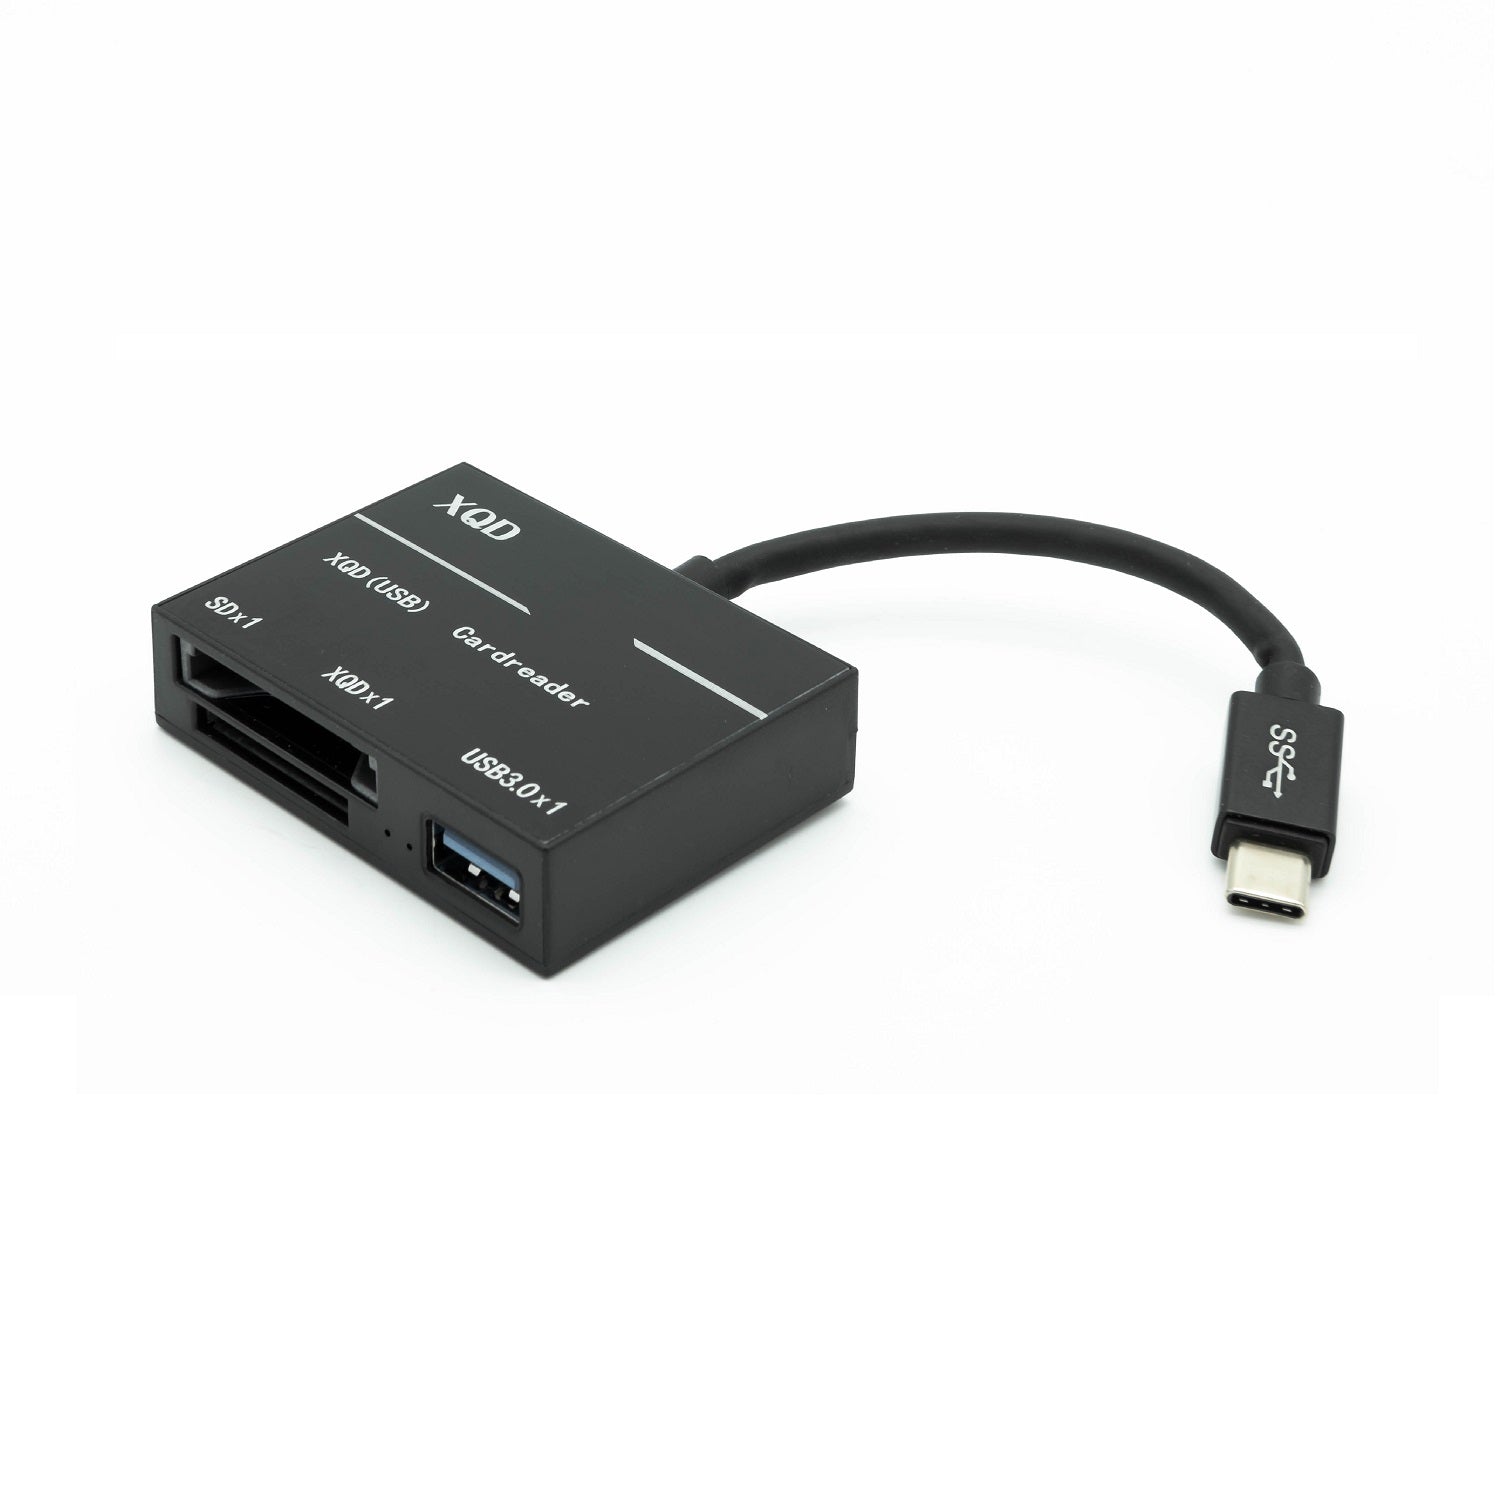 USB Type-C to XQD(tm) Card Reader with USB Hub Adapter